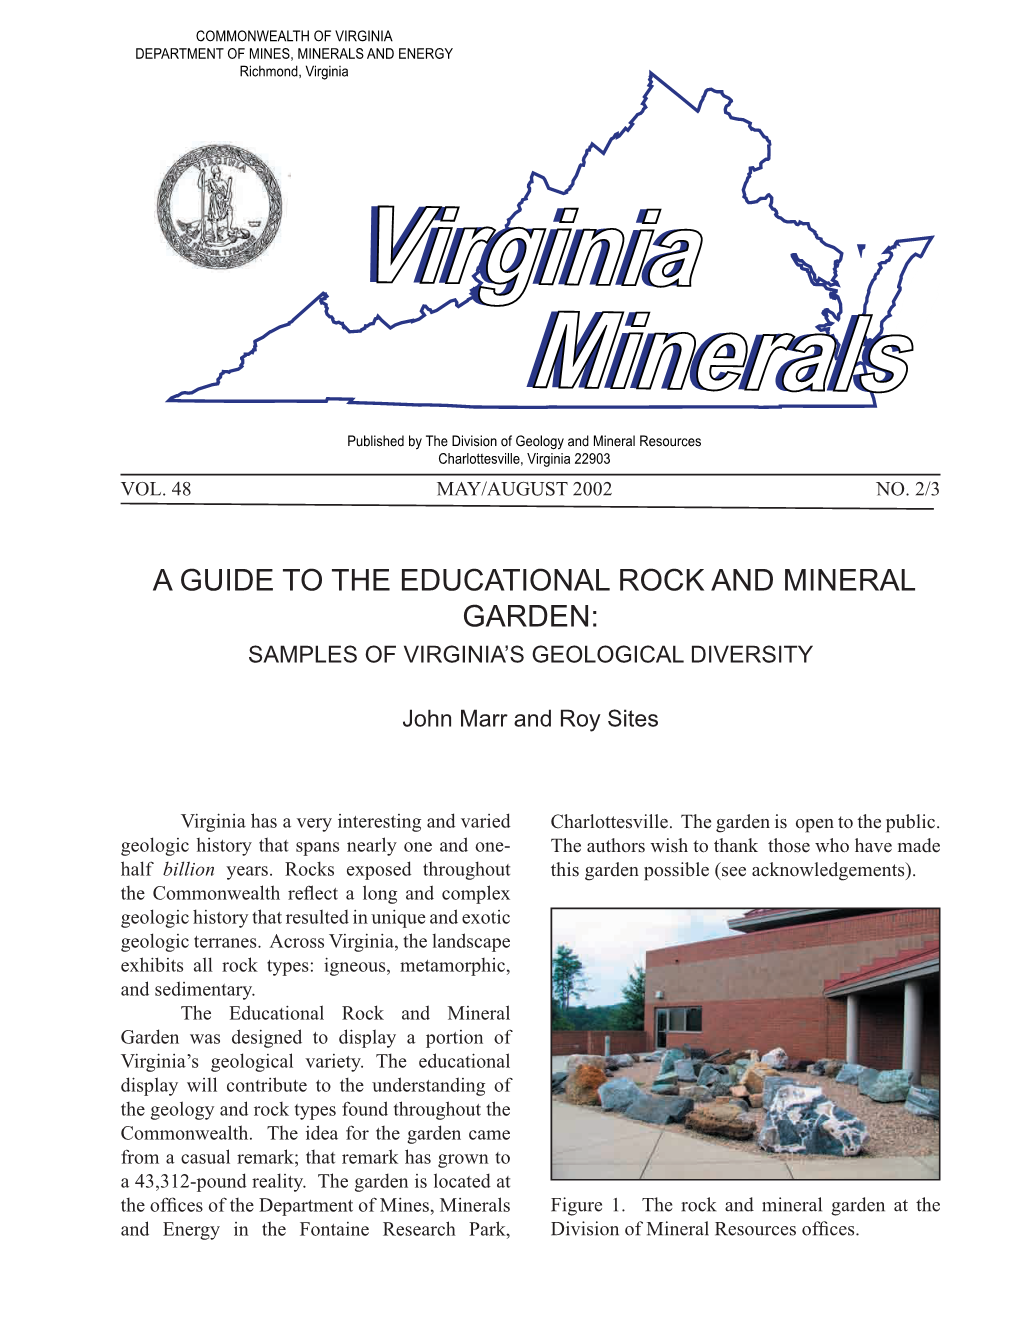 A Guide to the Educational Rock and Mineral Garden: Samples of Virginia’S Geological Diversity